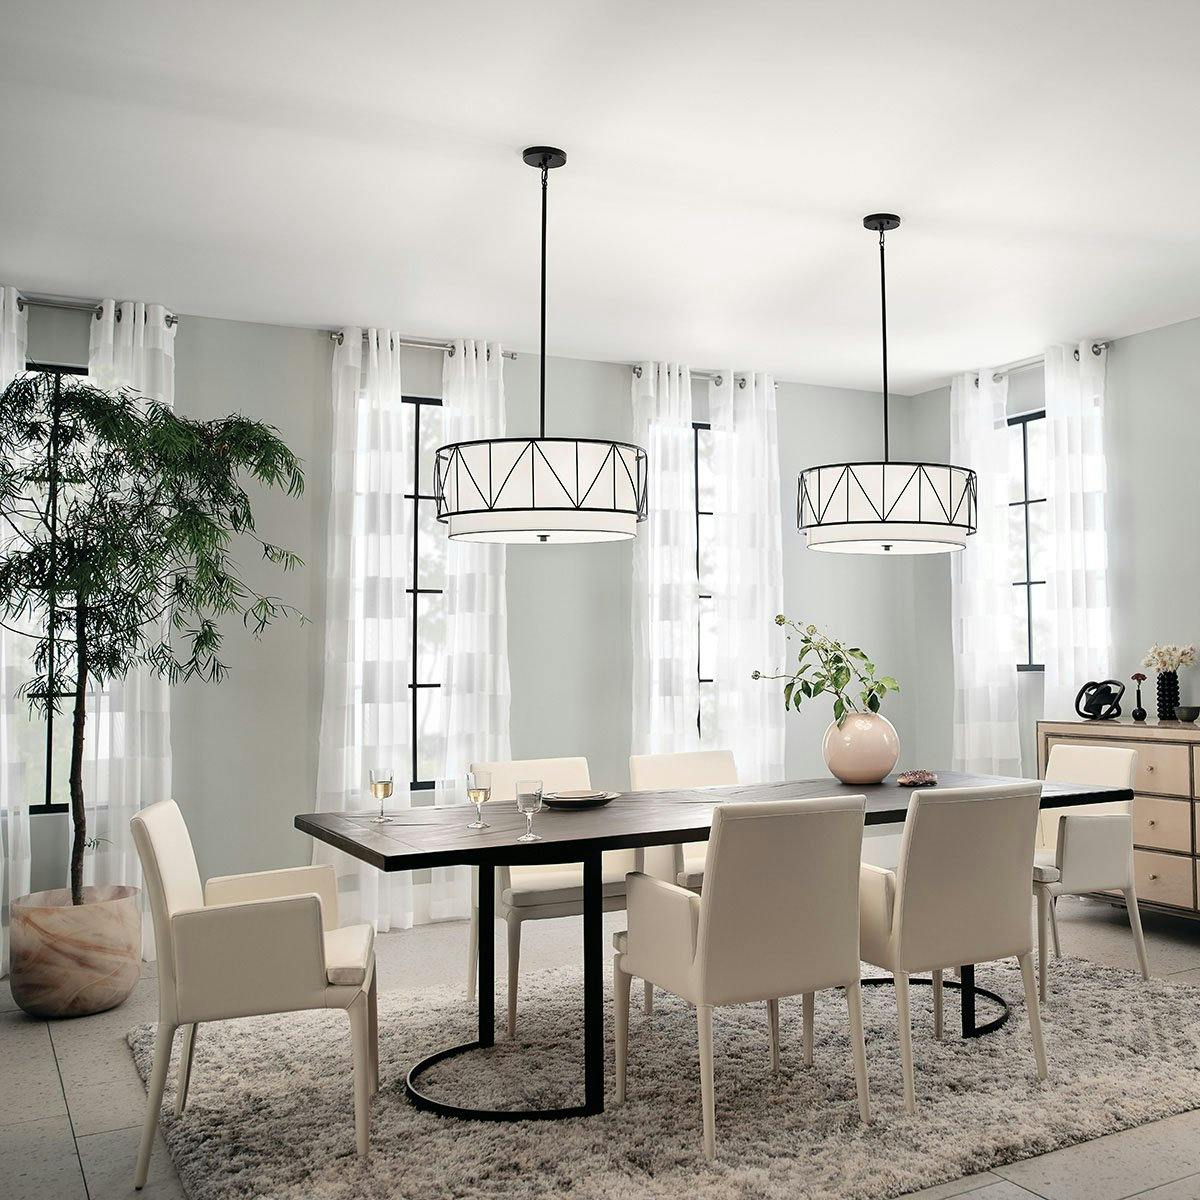 Day time dining room image featuring Birkleigh pendant 52072BK